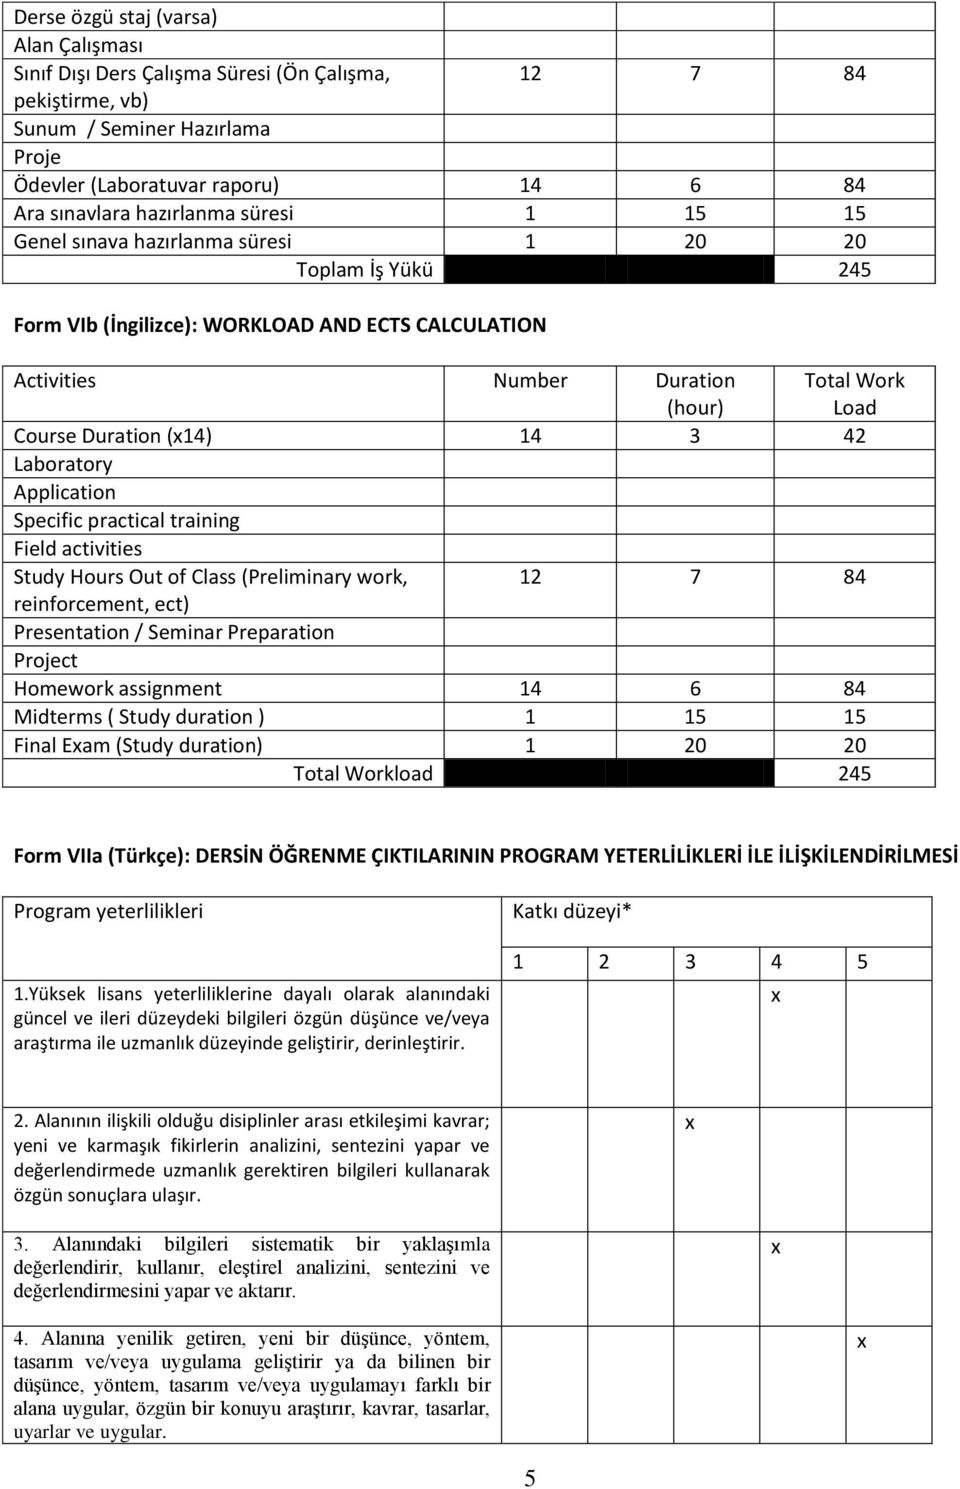 Laboratory Application Specific practical training Field activities Study Hours Out of Class (Preliminary work, reinforcement, ect) Total Work Load 12 7 84 Presentation / Seminar Preparation Project